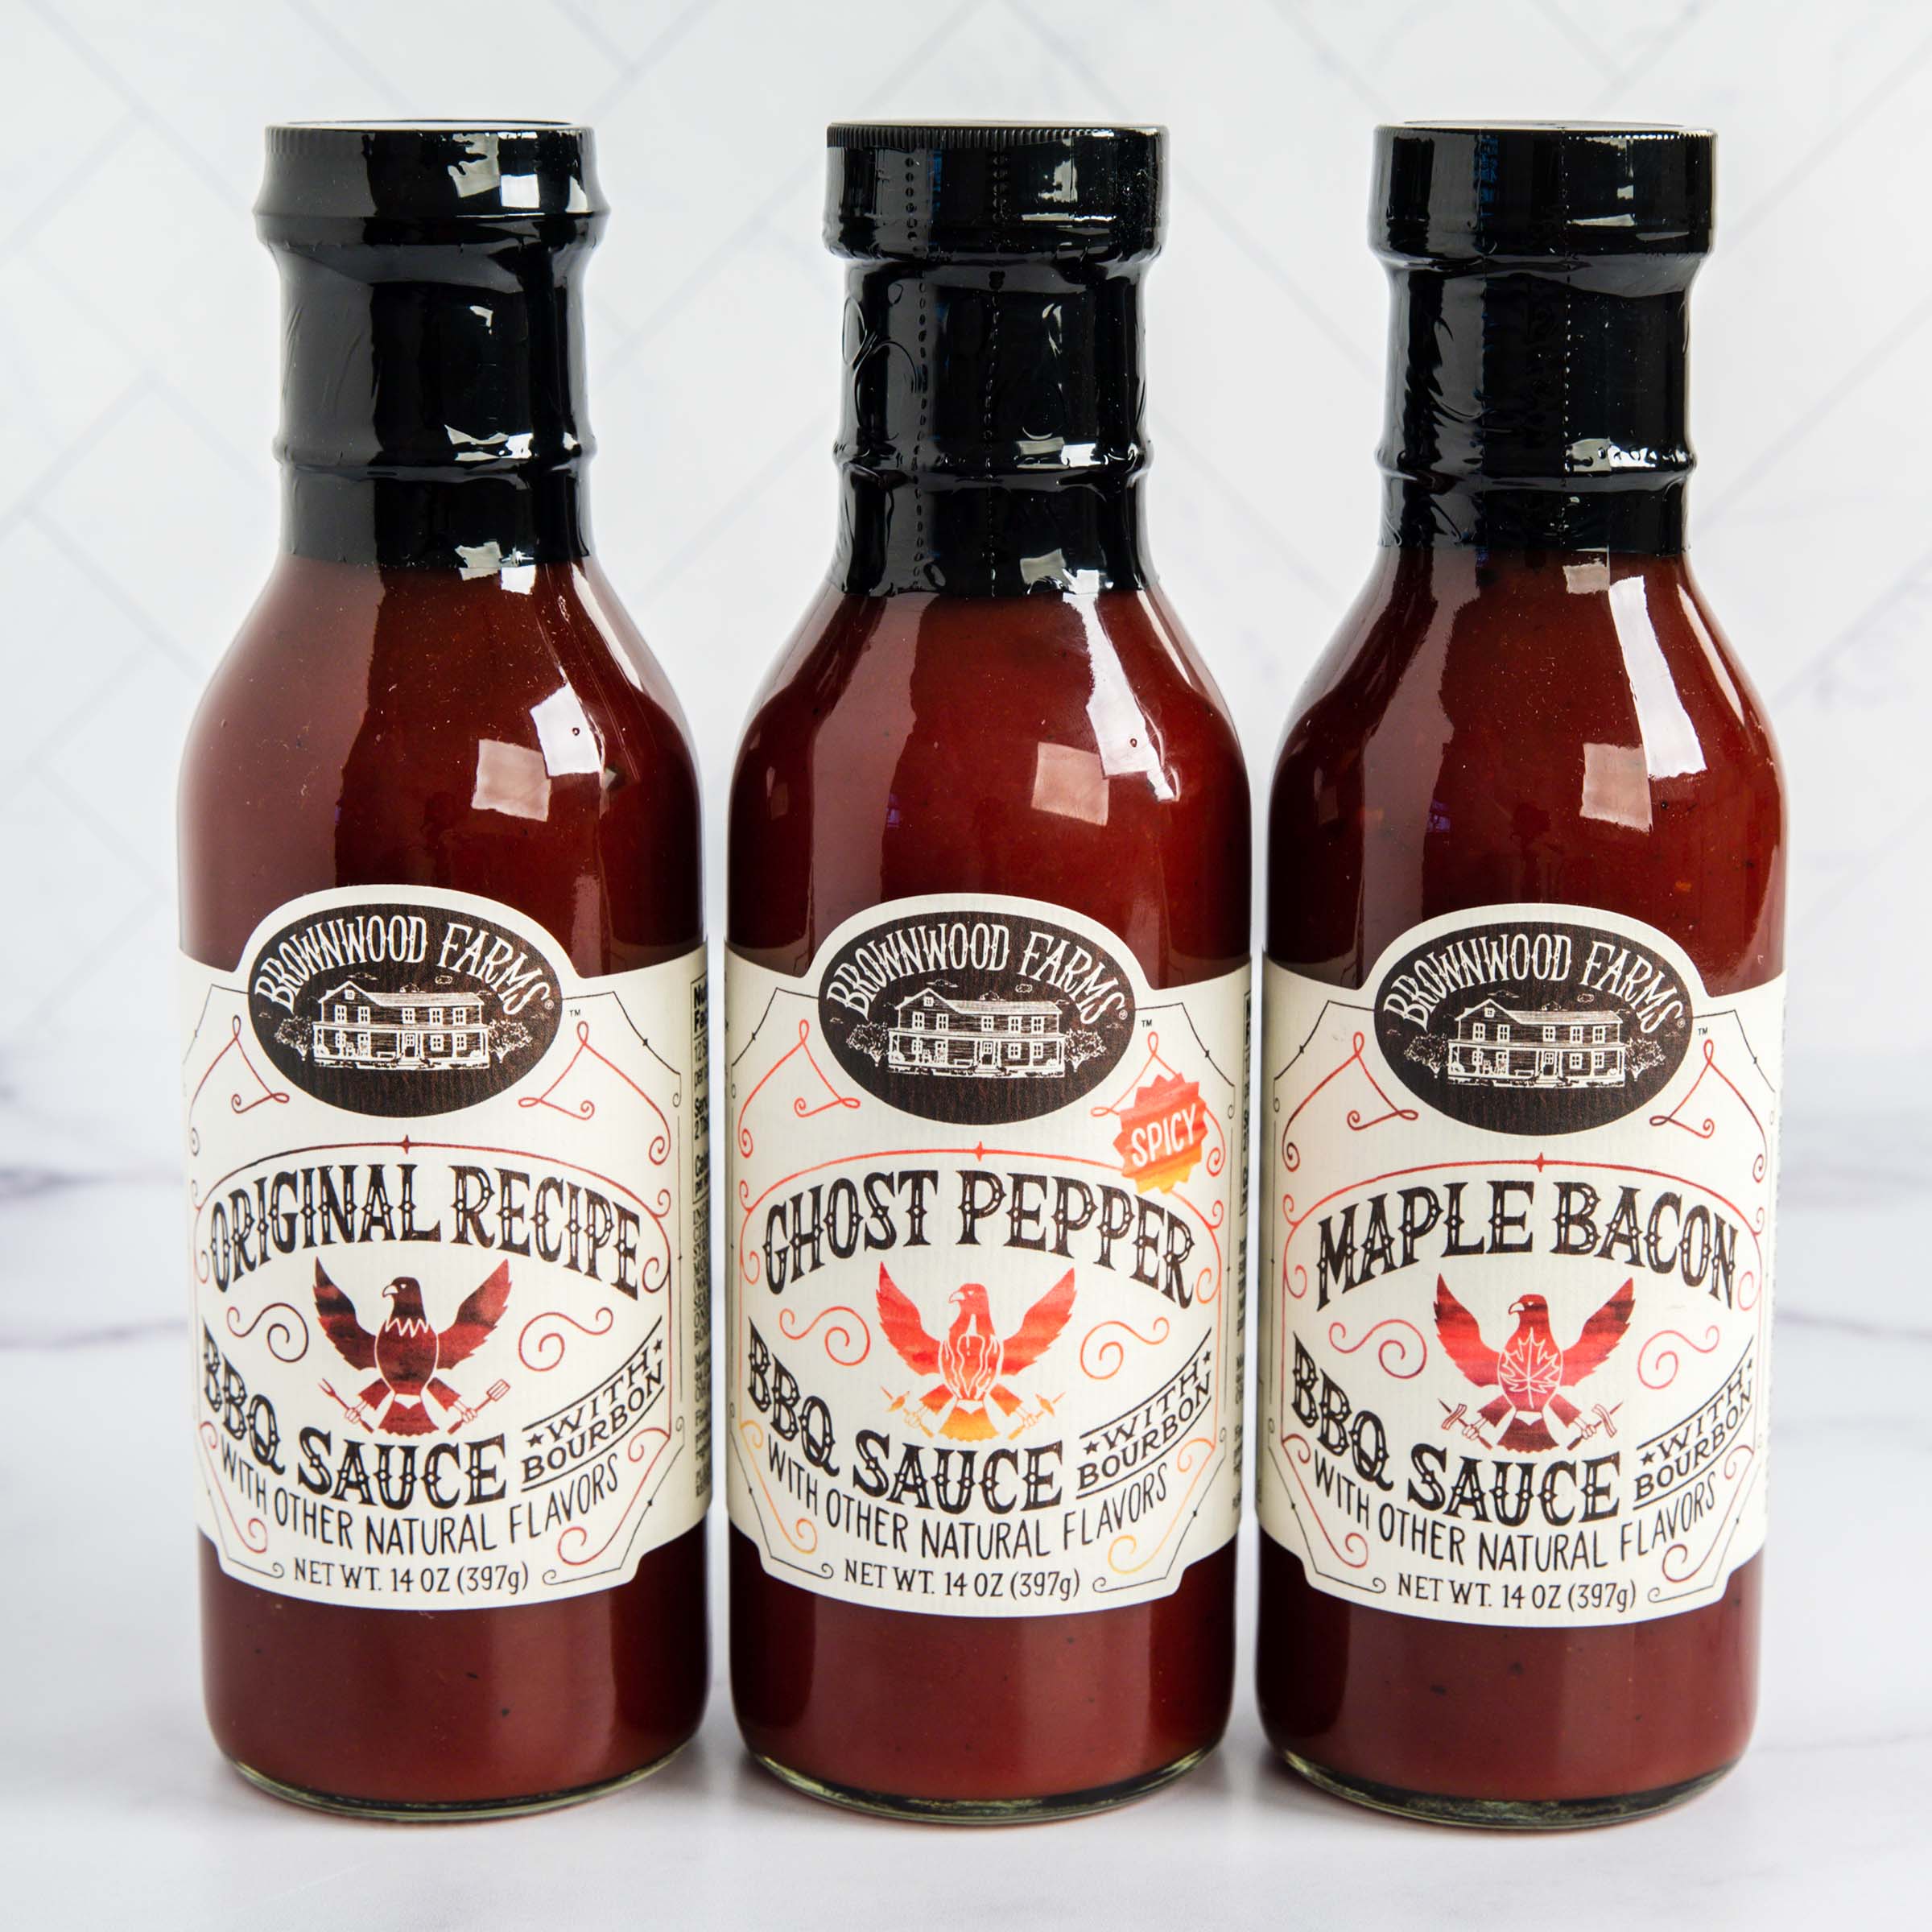 All Natural Bourbon-Infused BBQ Sauce_Brownwood Farms_Condiments & Spreads